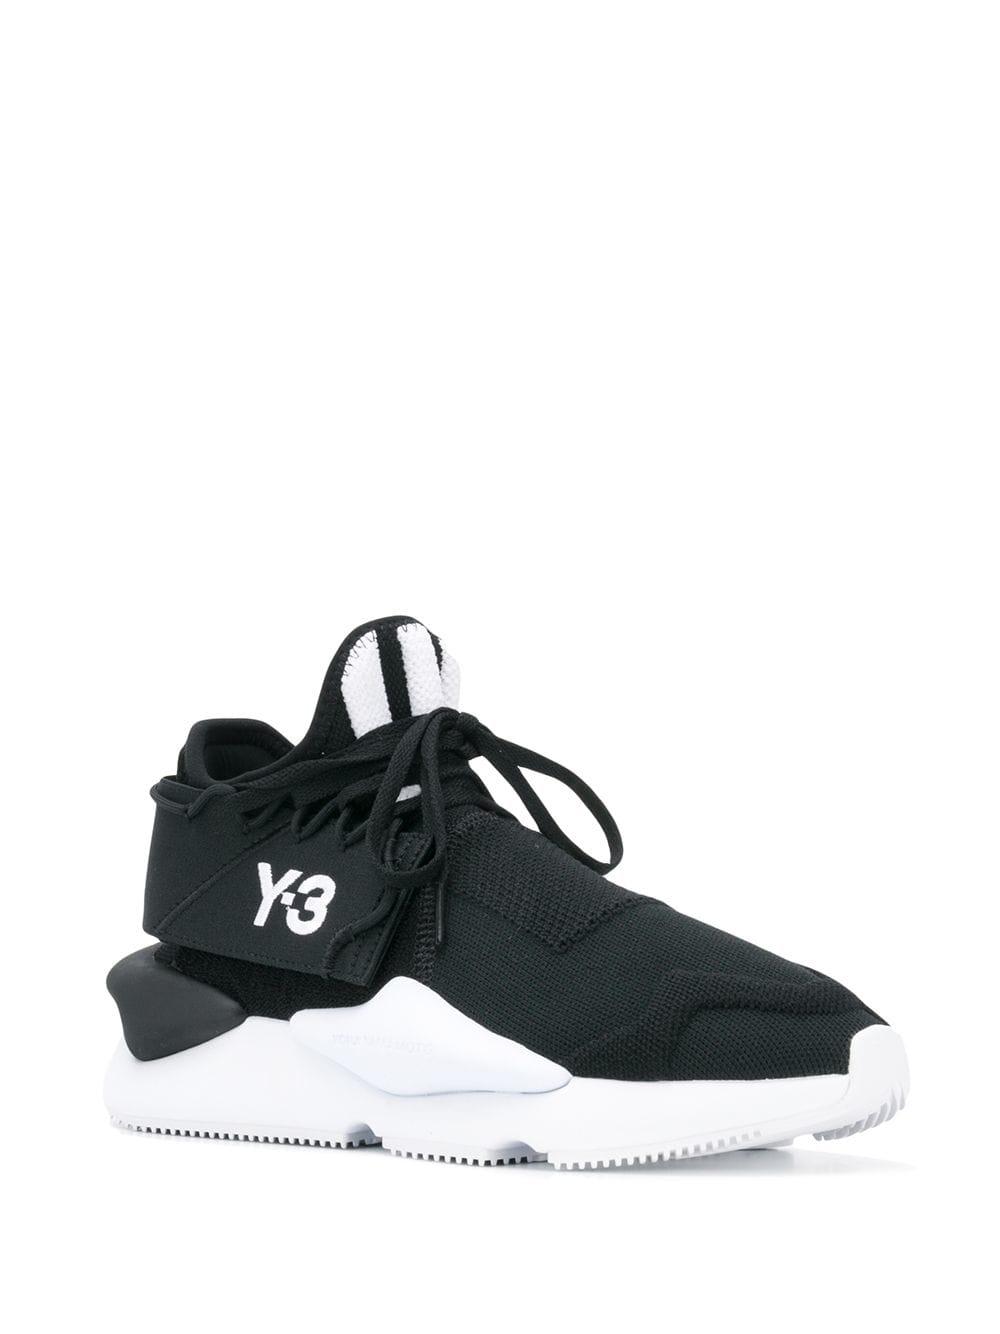 Y-3 Neoprene Kaiwa Knit Trainers in Nero (Black) for Men - Save 24 